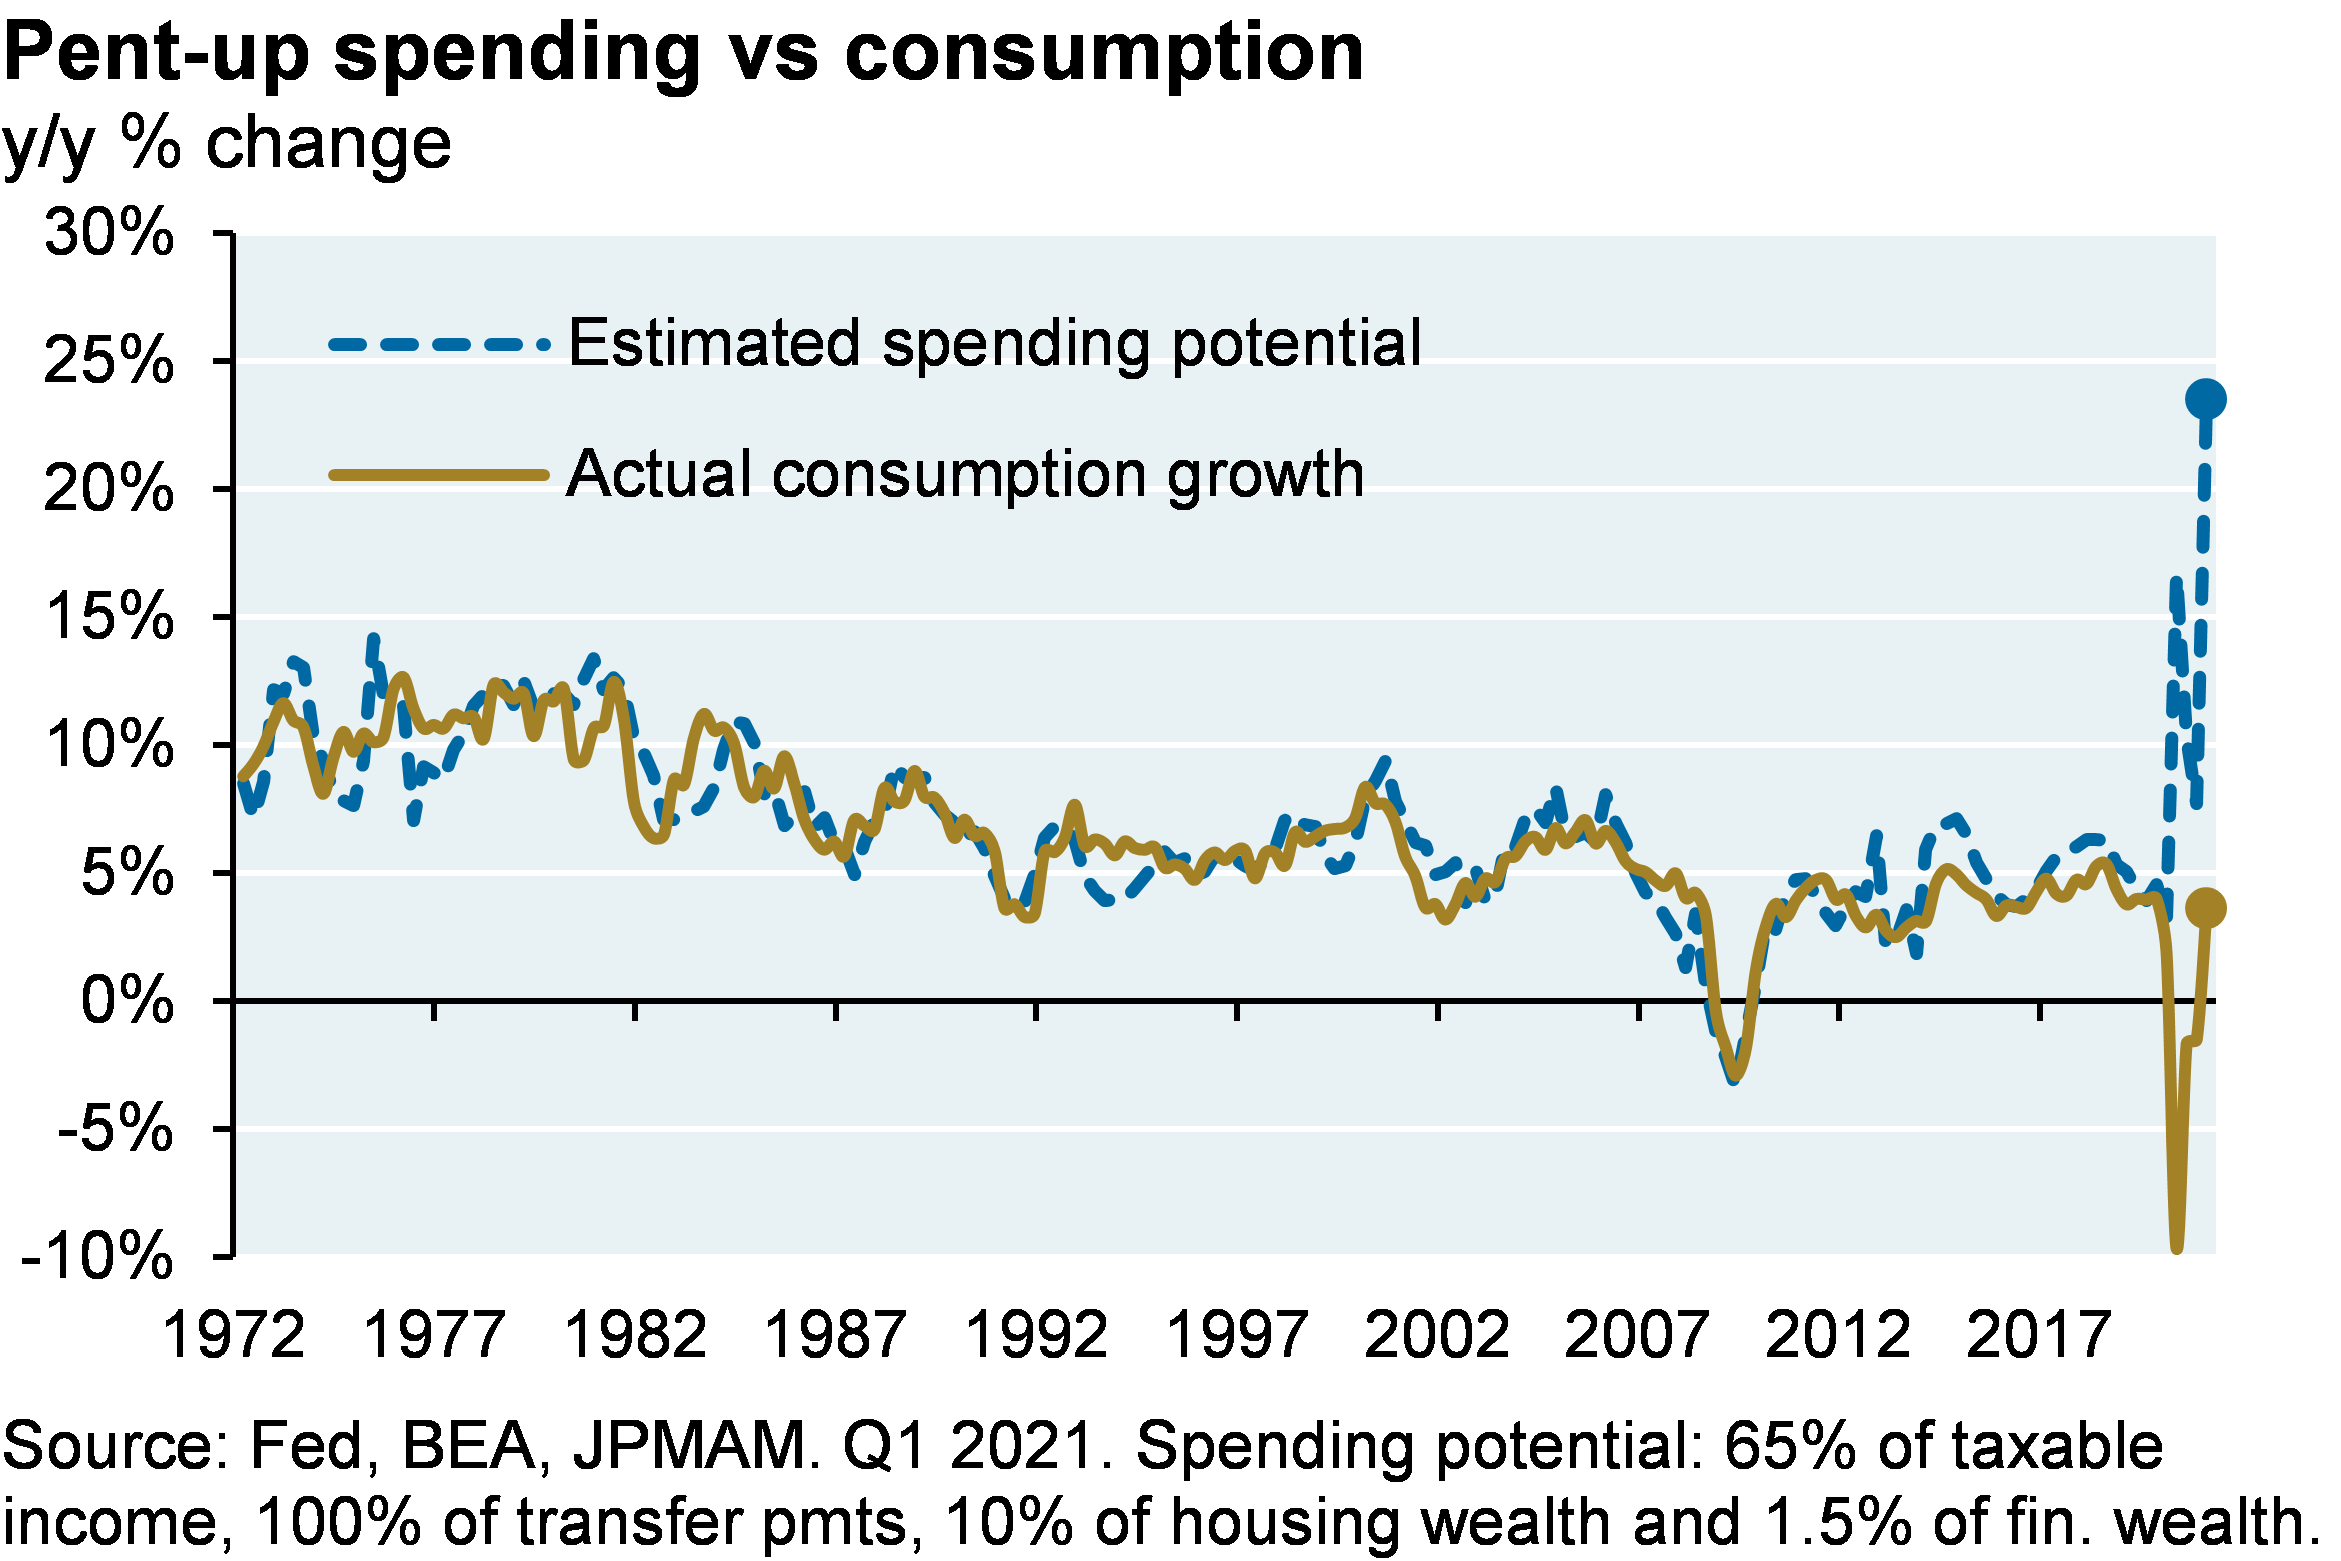 Line chart shows estimated spending potential and actual consumption growth, shown as the year-over-year percent change. Chart shows a spike in spending potential to around 25% from around 5% despite a spike in consumption growth from around -10% to 5%.  